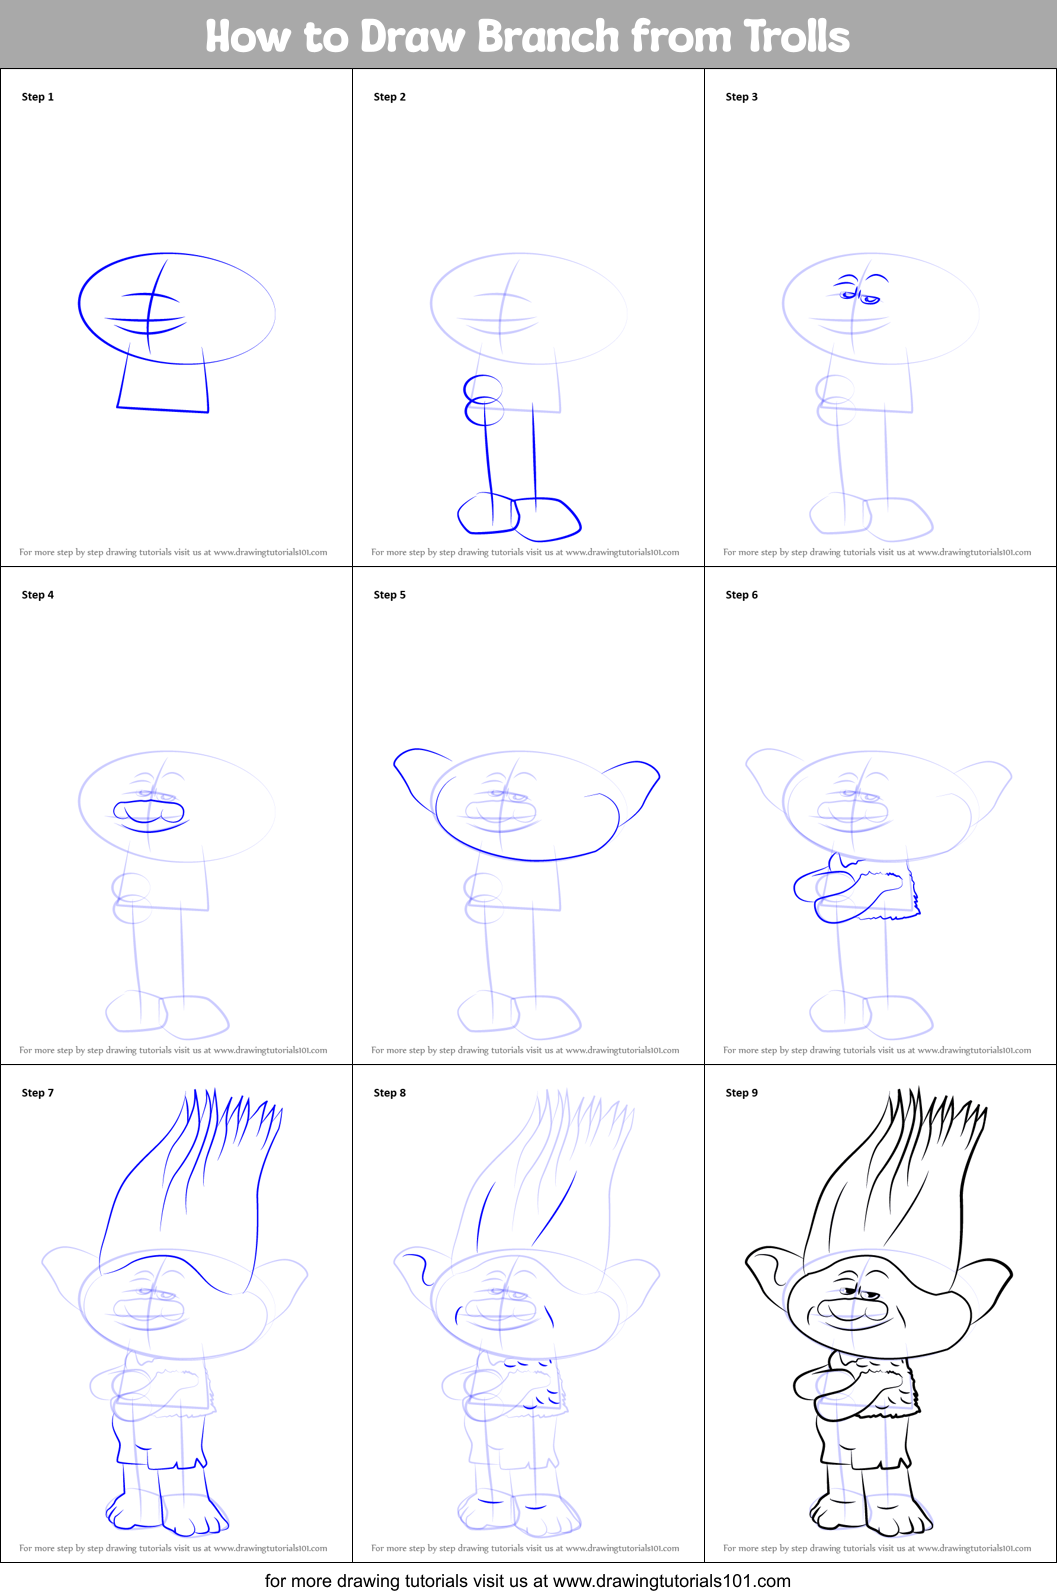 How to Draw Branch from Trolls printable step by step drawing sheet